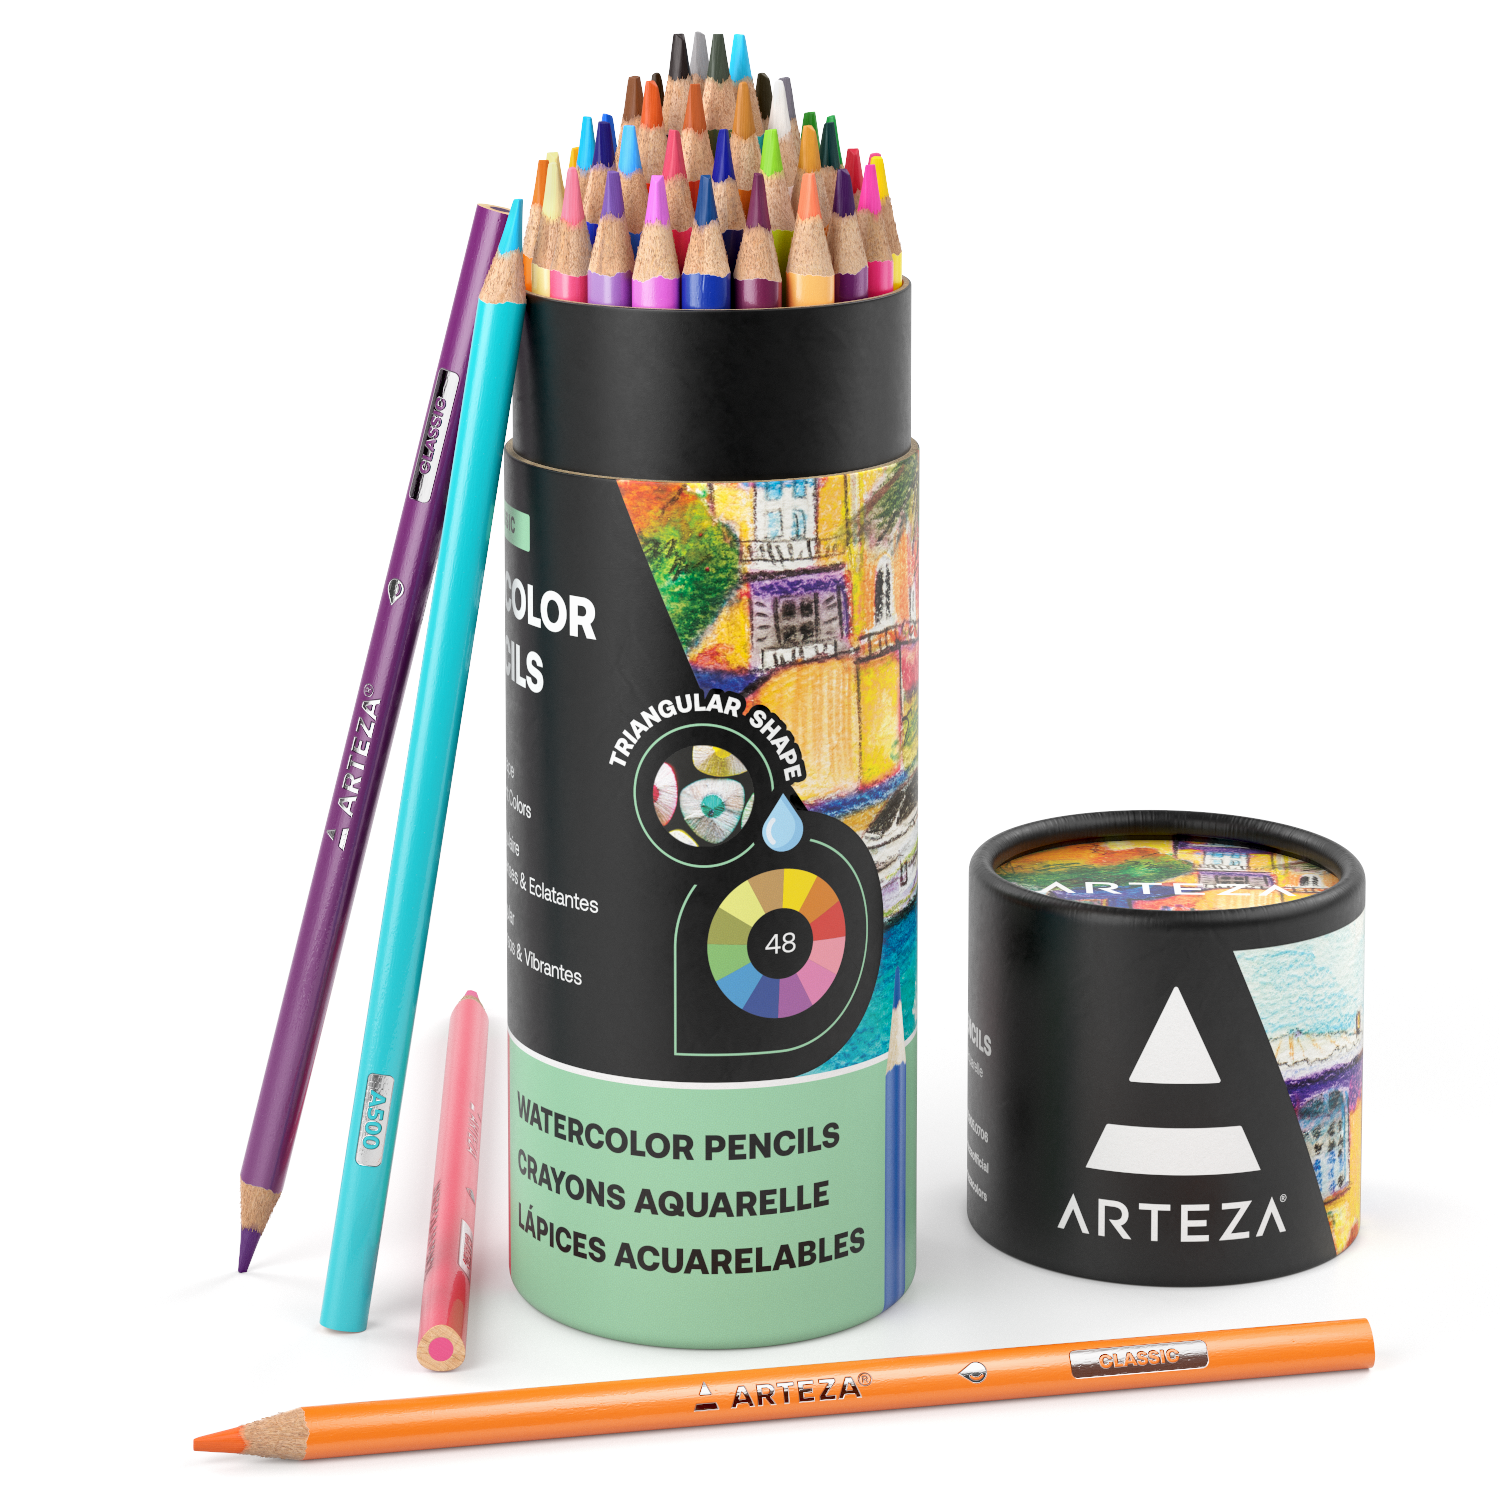 Arteza Watercolor Pencils, Triangle Shaped, Assorted Colors, Coloring Set for Adult Artists, Non-Toxic - 48 Pack - image 1 of 8